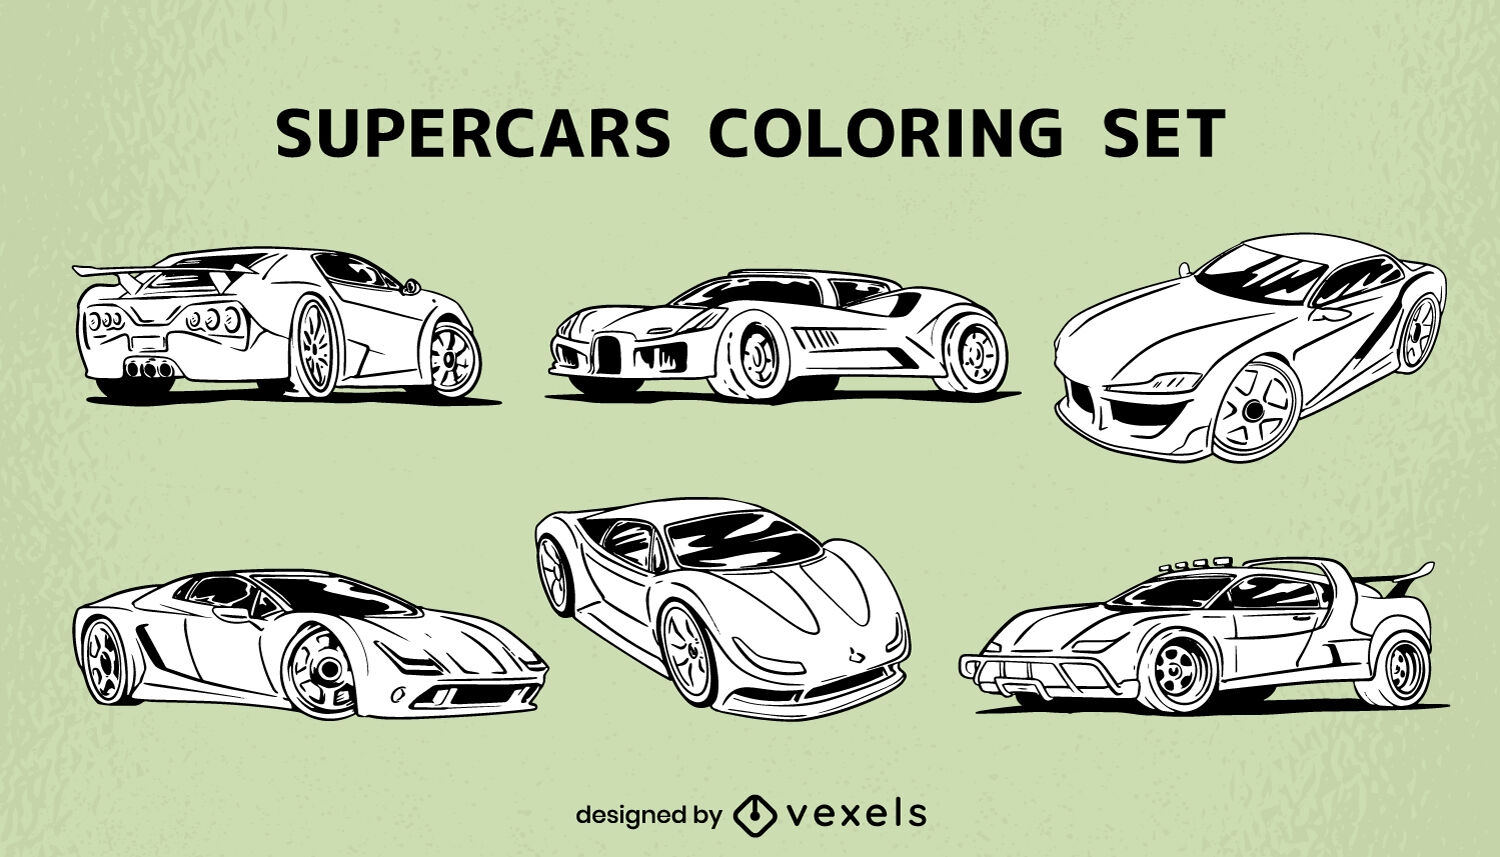 Awesome supercars coloring set